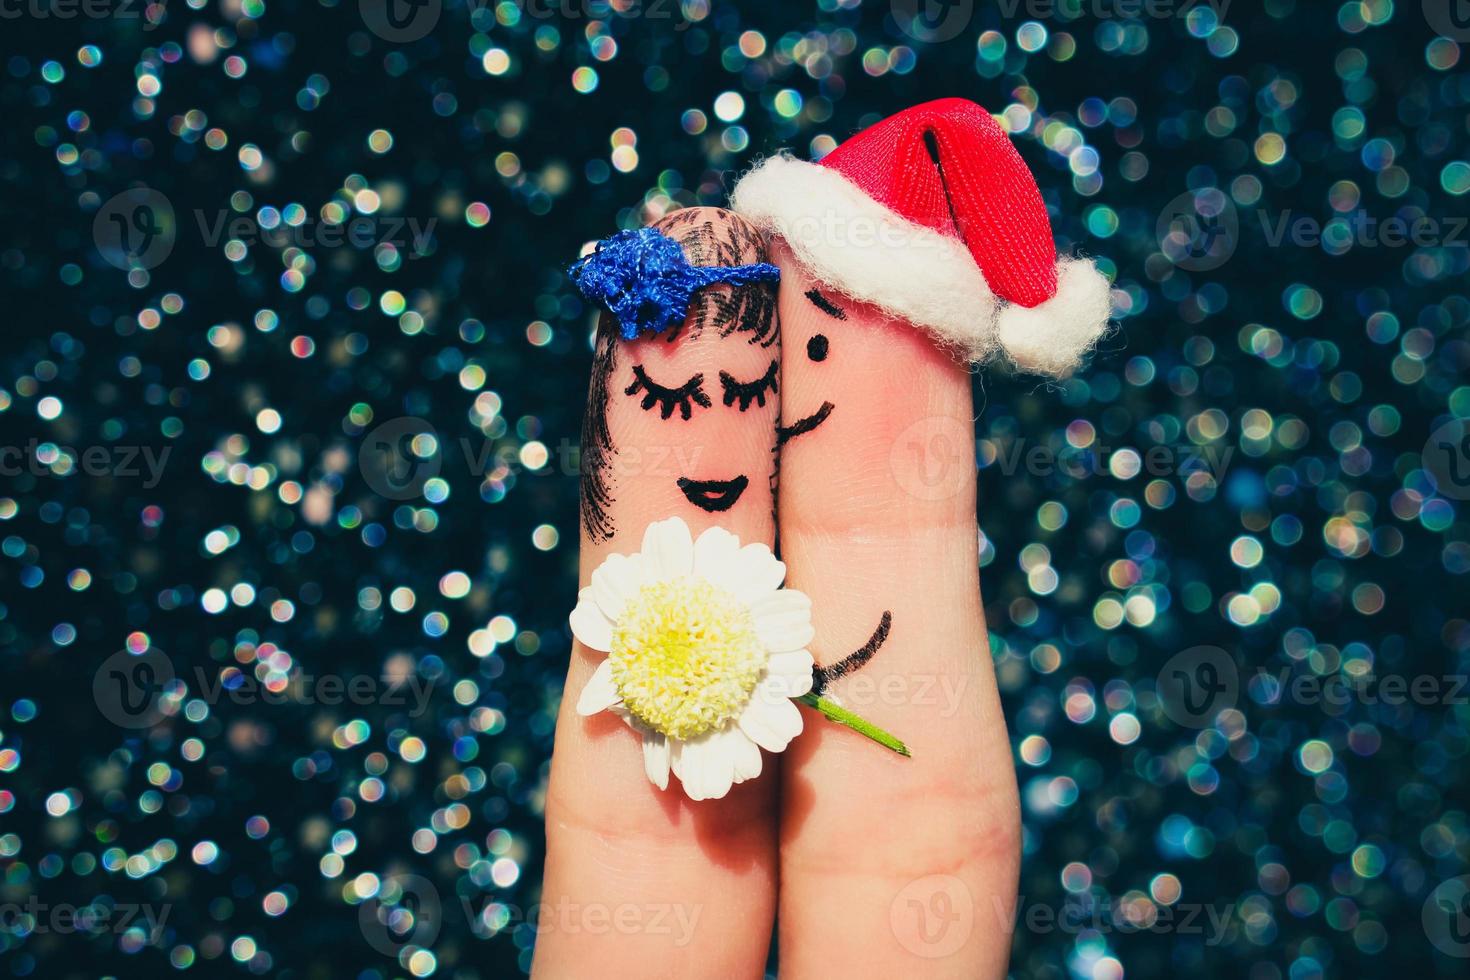 Finger art of Happy couple. Man is giving flowers to woman photo